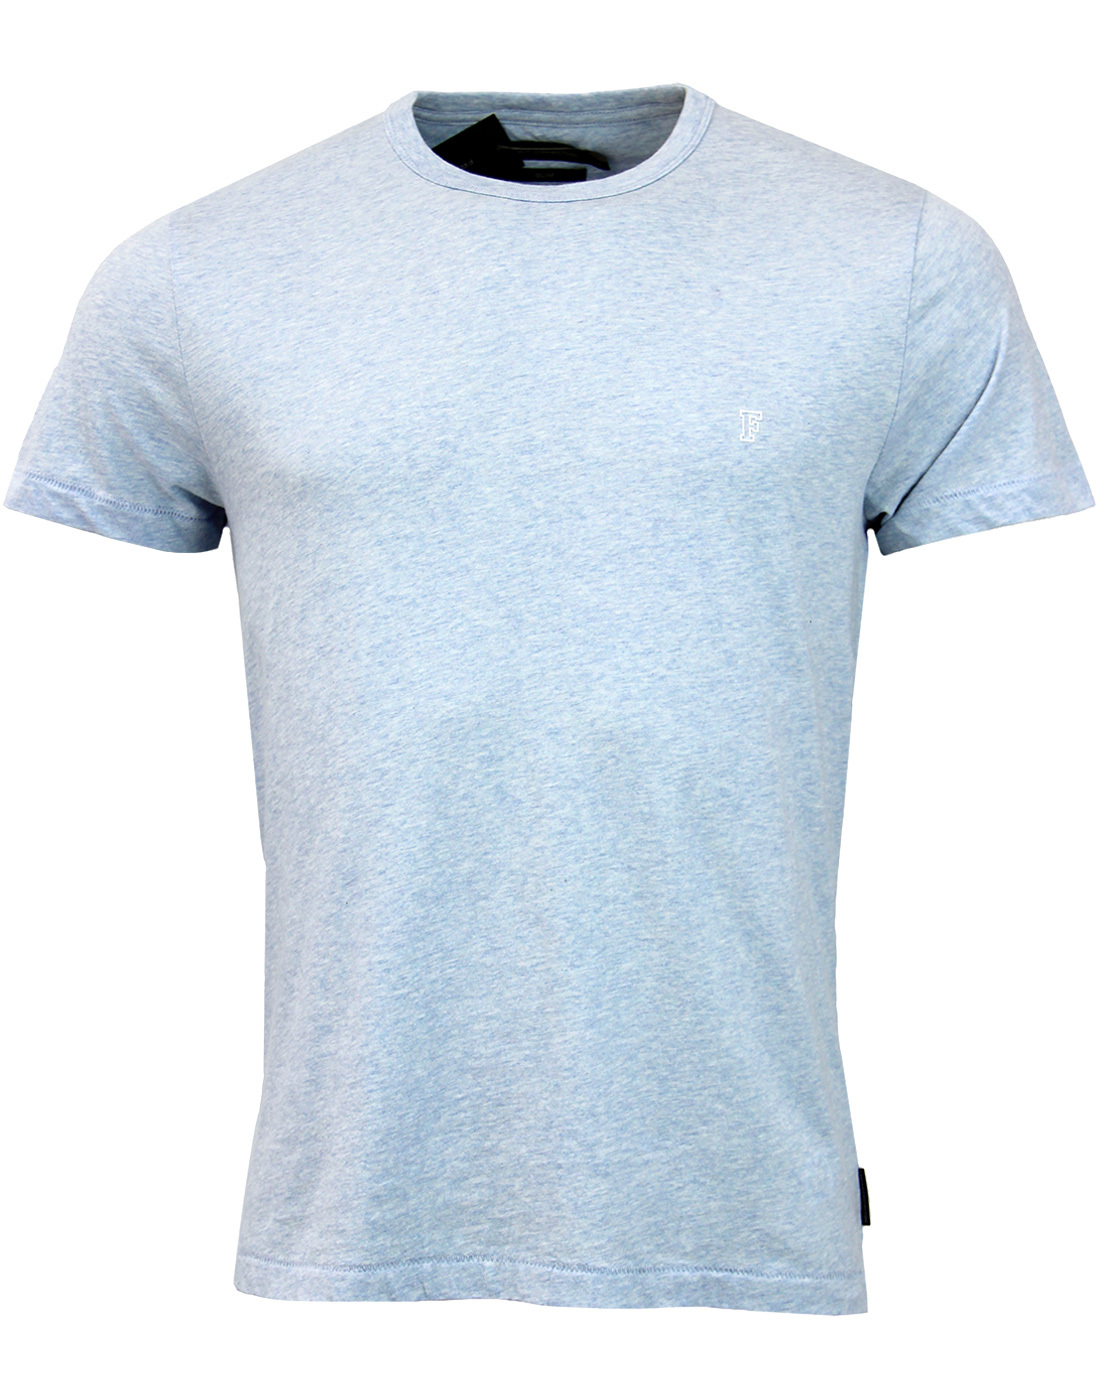 FRENCH CONNECTION Retro Slim Fit Crew Neck Tee in Kentucky Blue